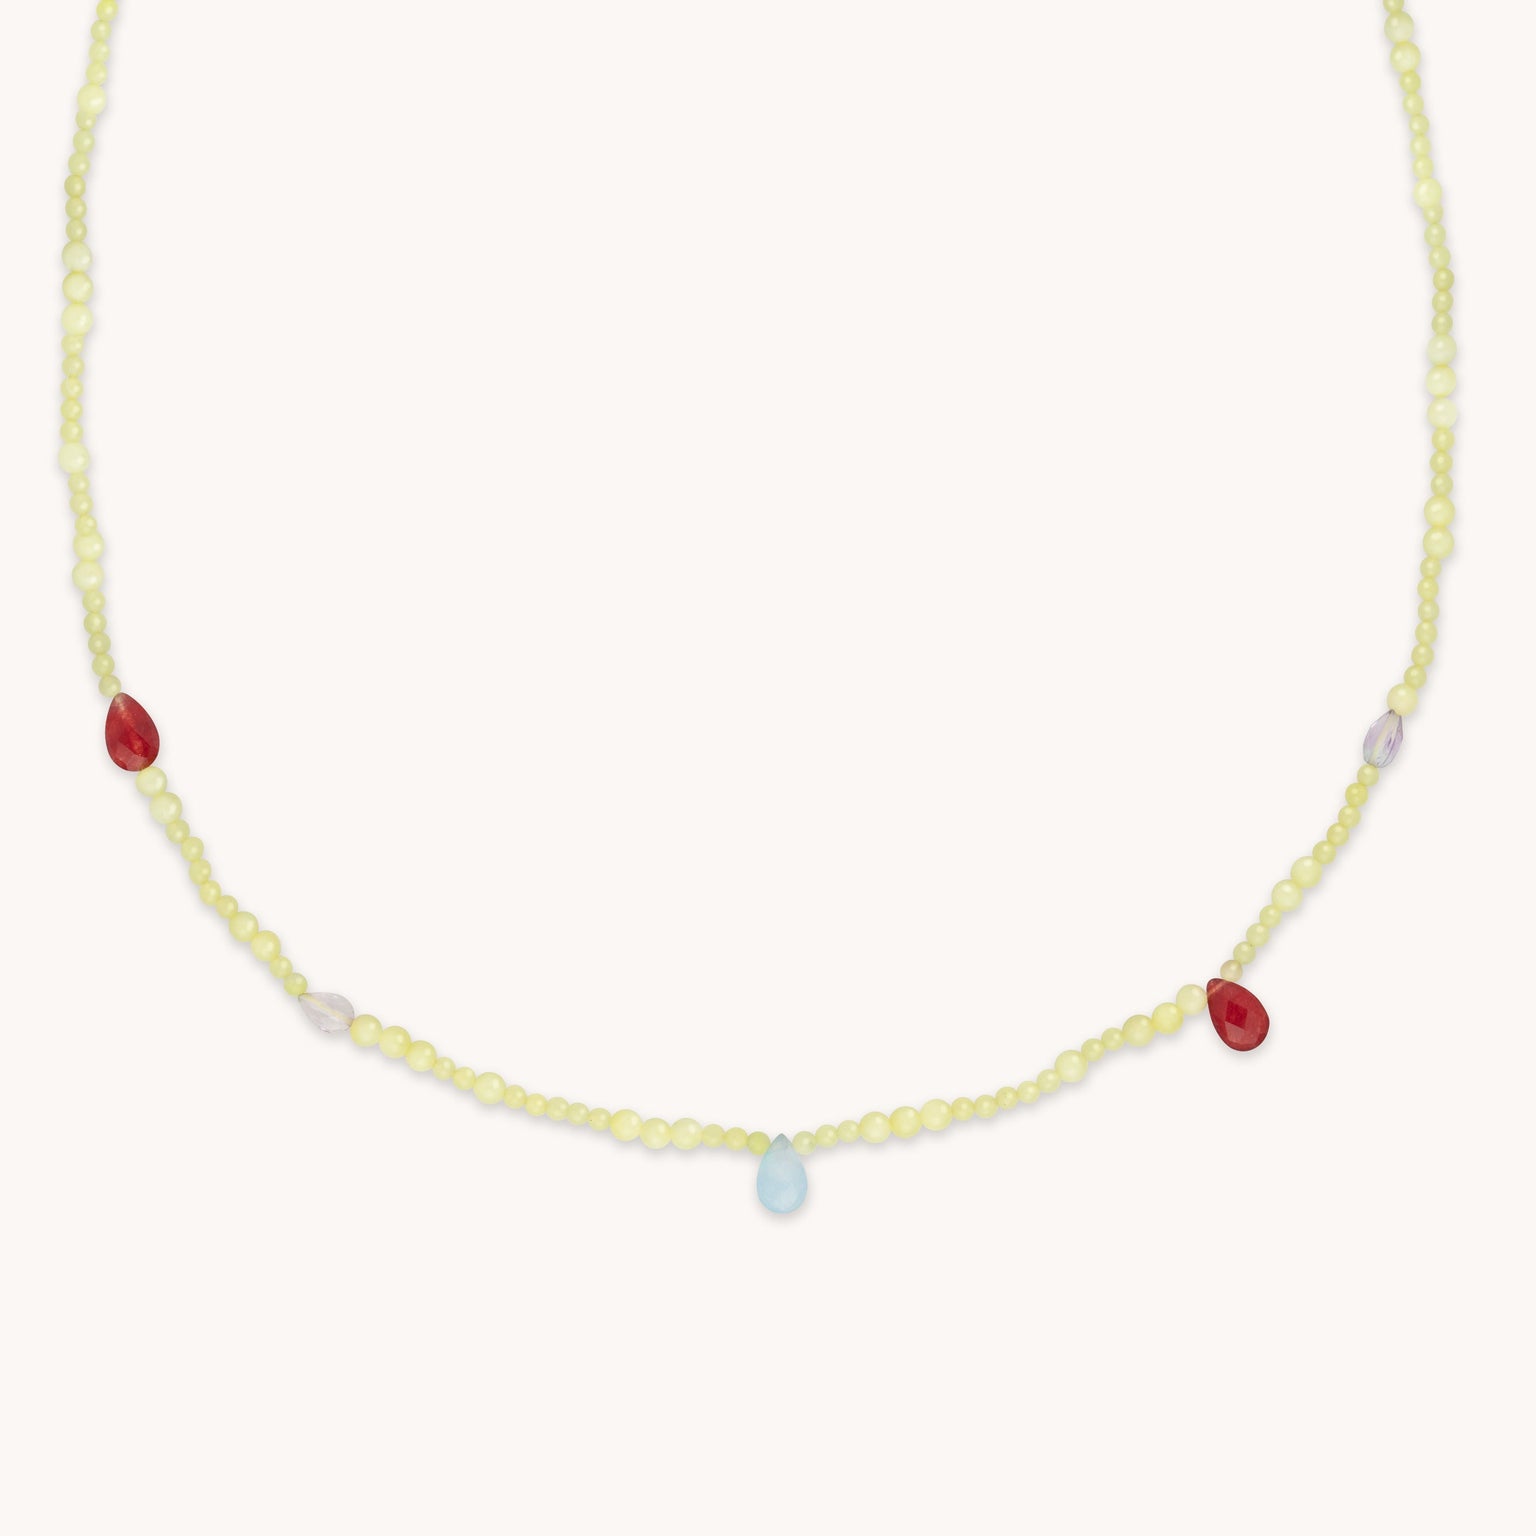 Lemon Jade Charm Beaded Necklace in Gold